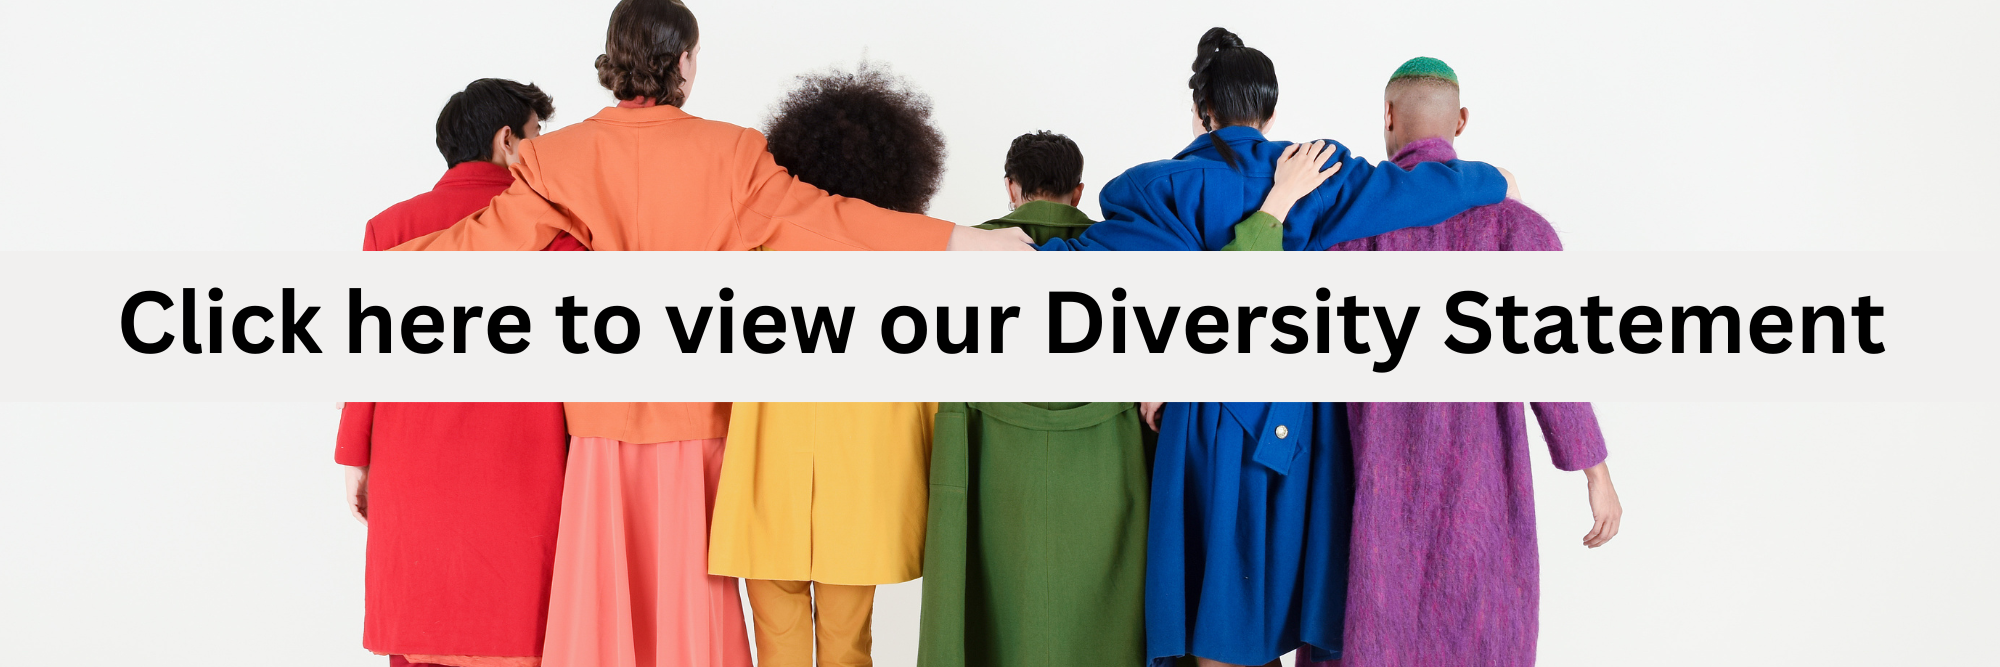 Click here to view our Diversity Statement (9 x 3 in)